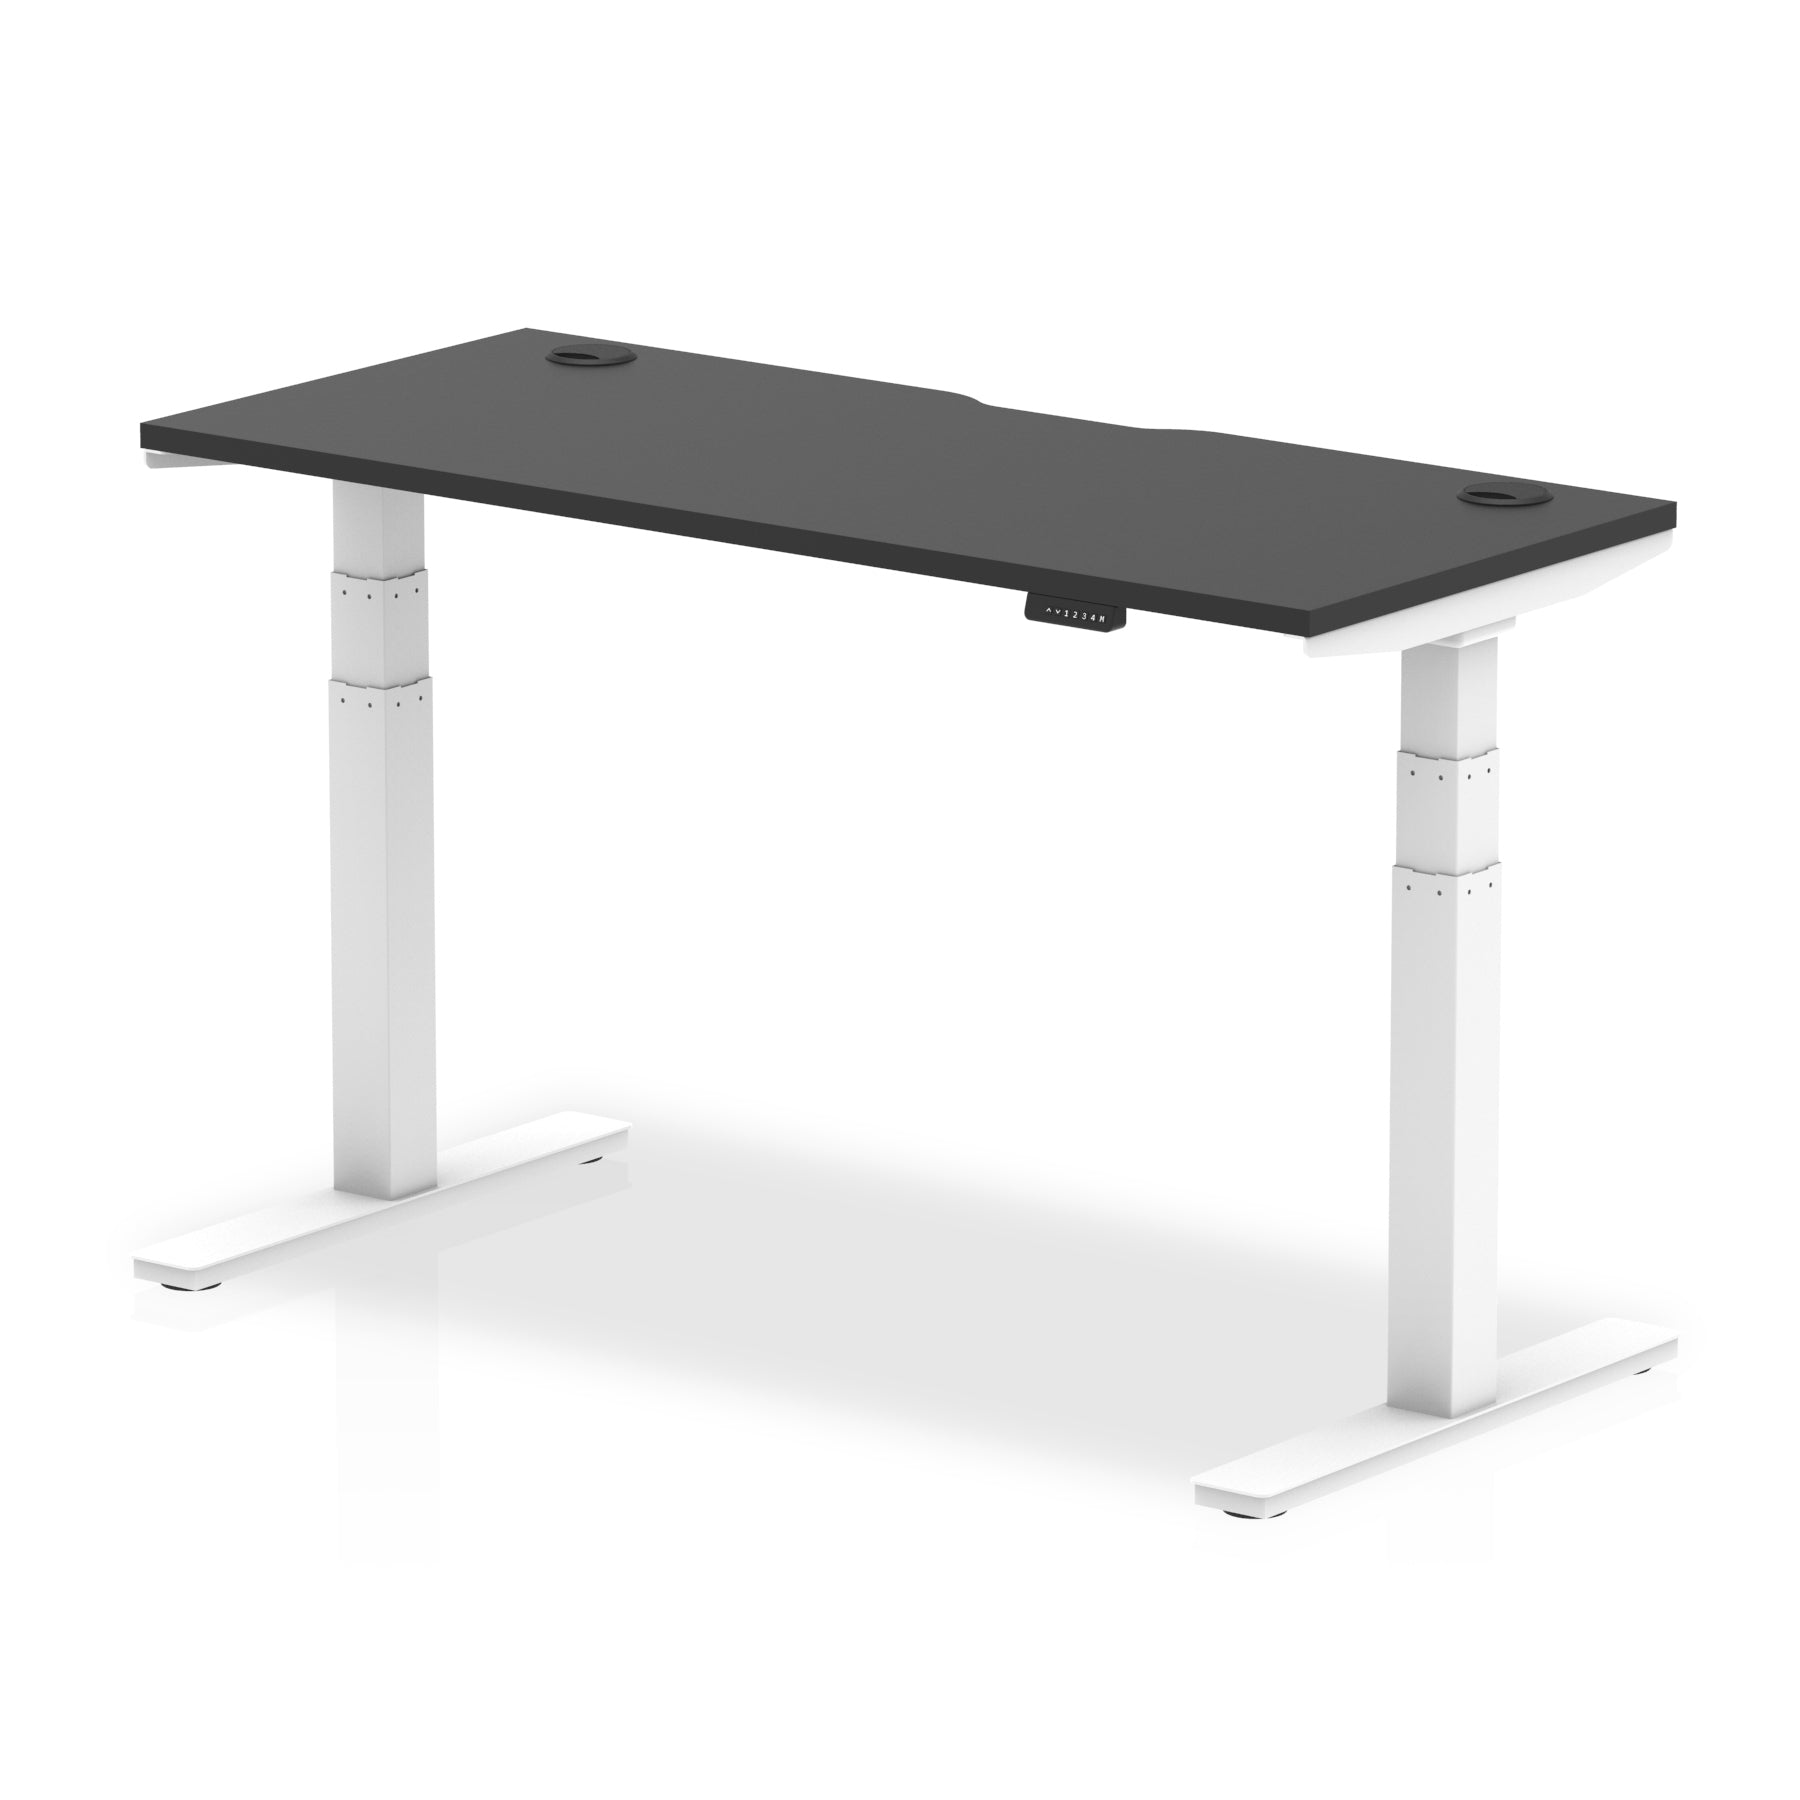 Air Black Series Slimline Height Adjustable Desk - 1200-1800mm Width, 660-1310mm Height, MFC Material, 5-Year Guarantee, Self-Assembly